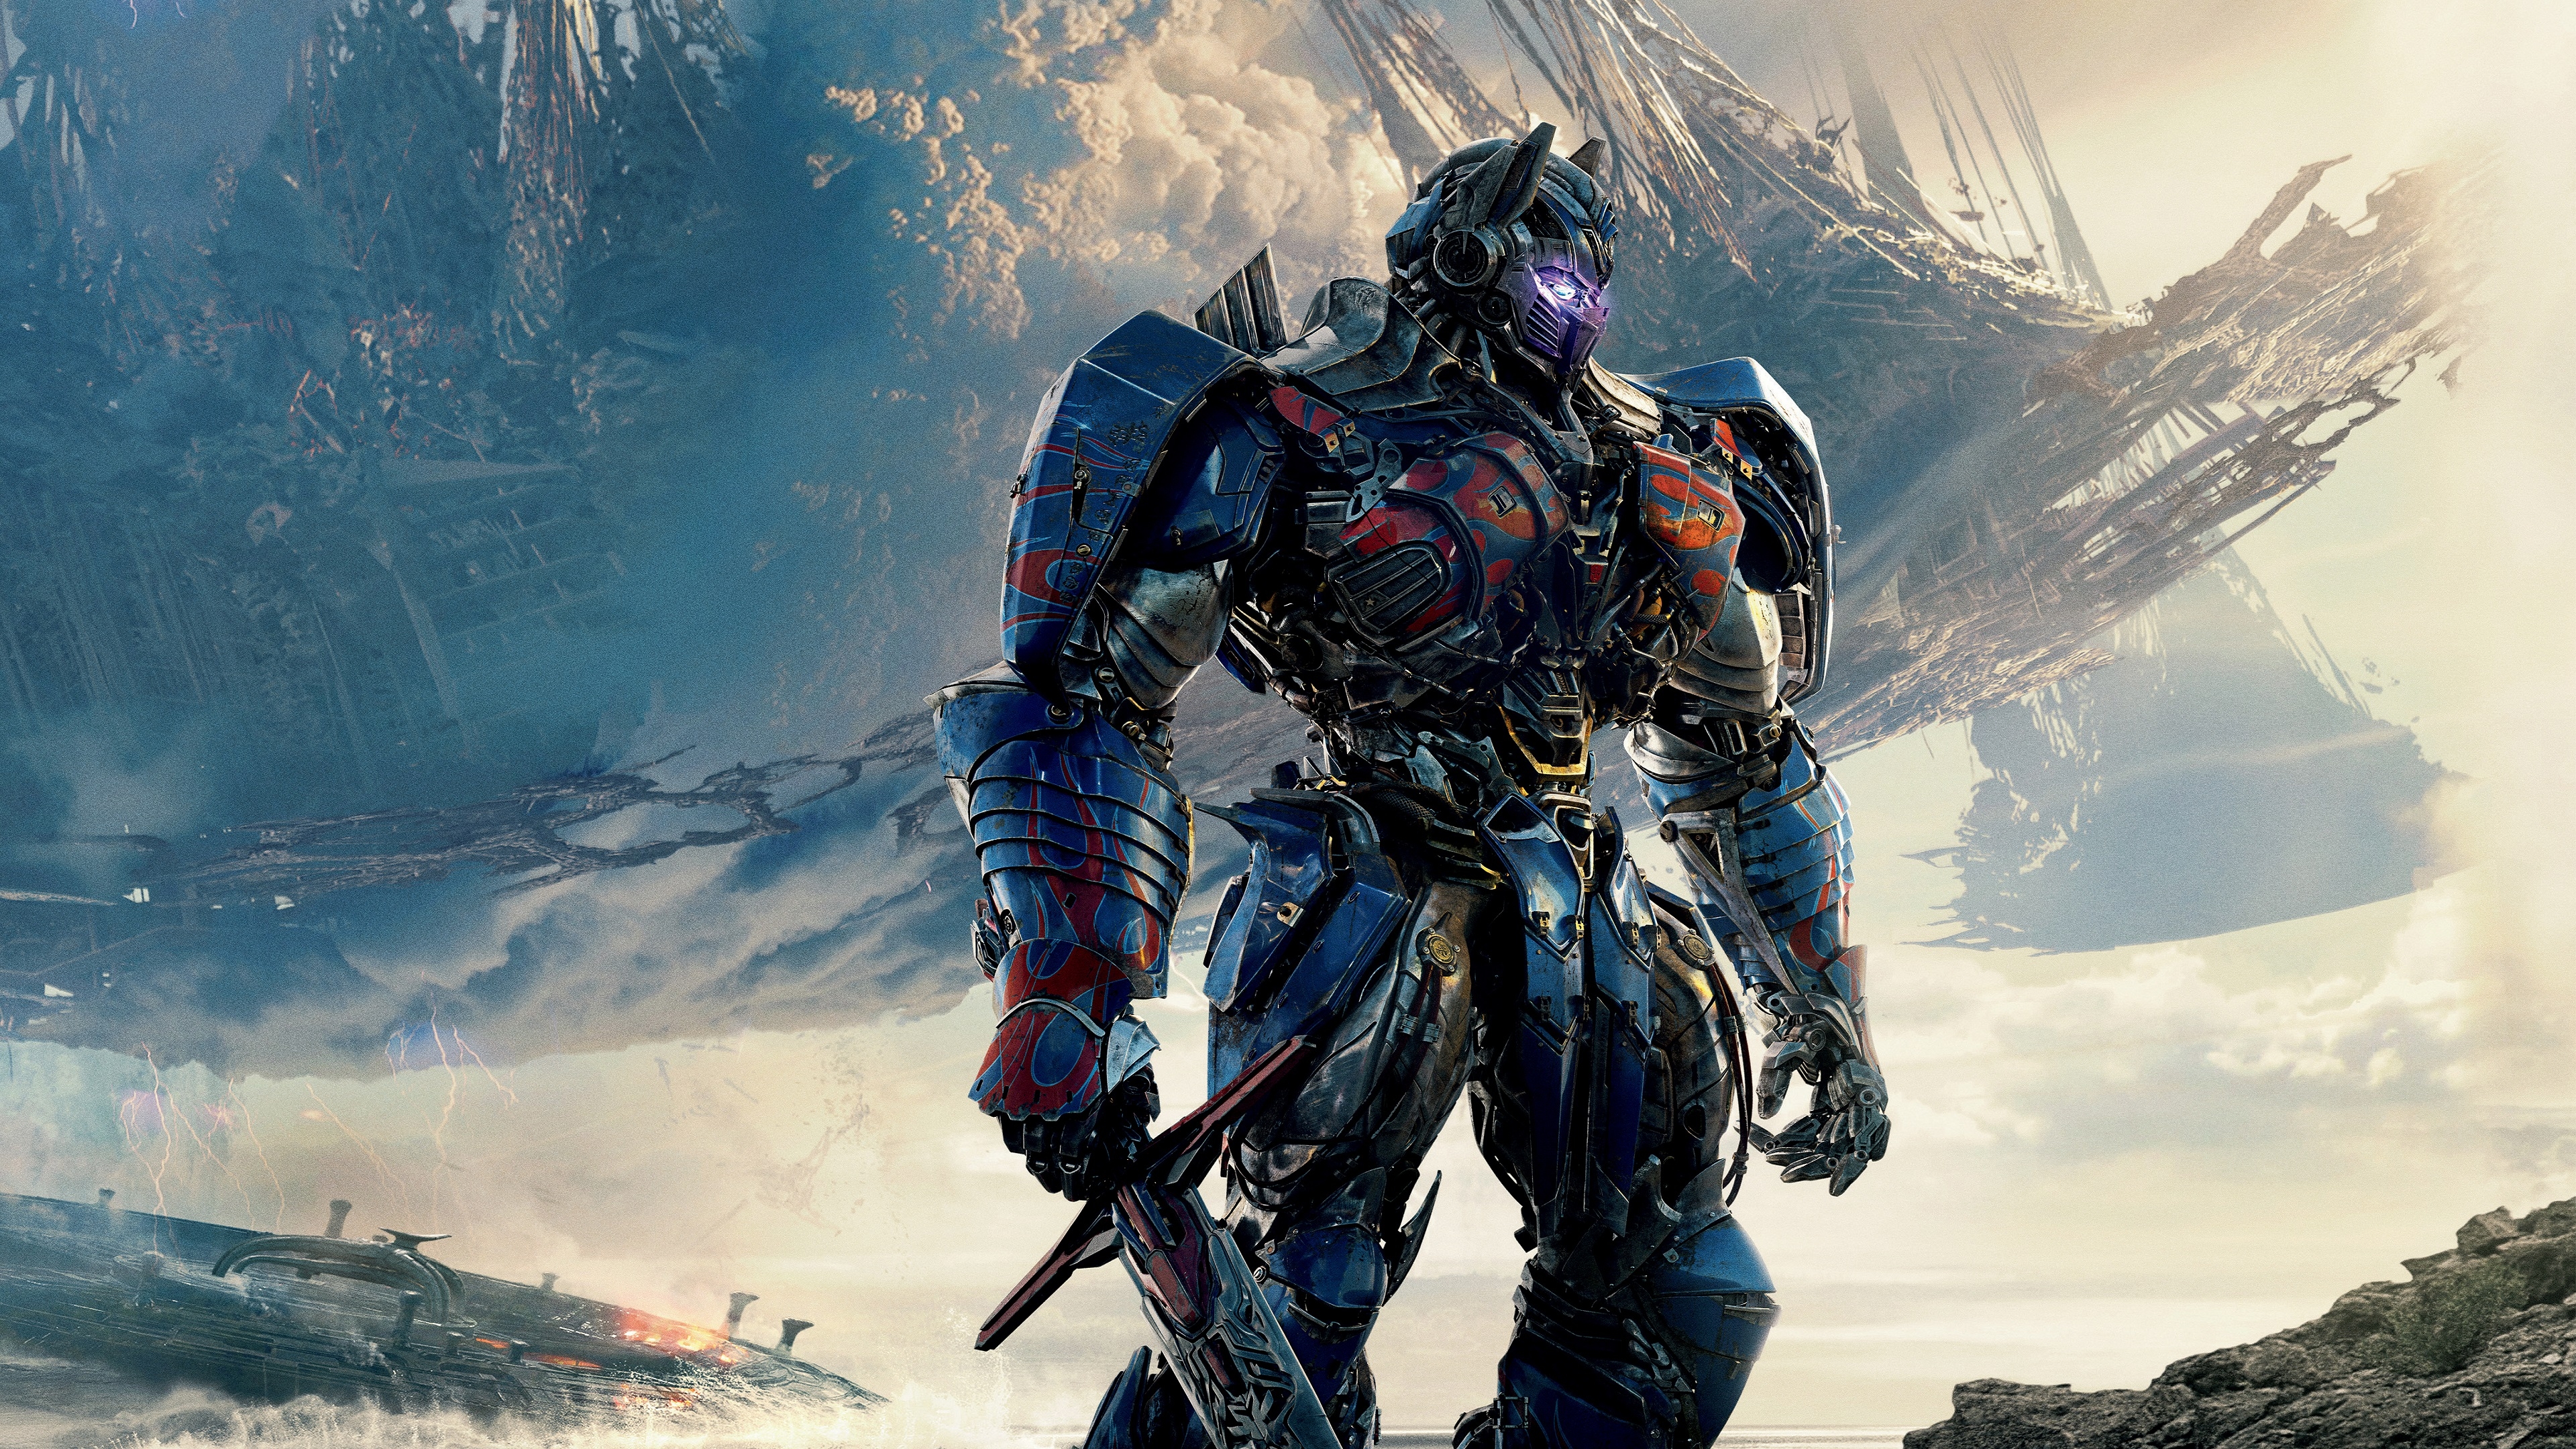 Optimus Prime Transformers The Last Knight for 3840 x 2160 4K Ultra HDTV resolution